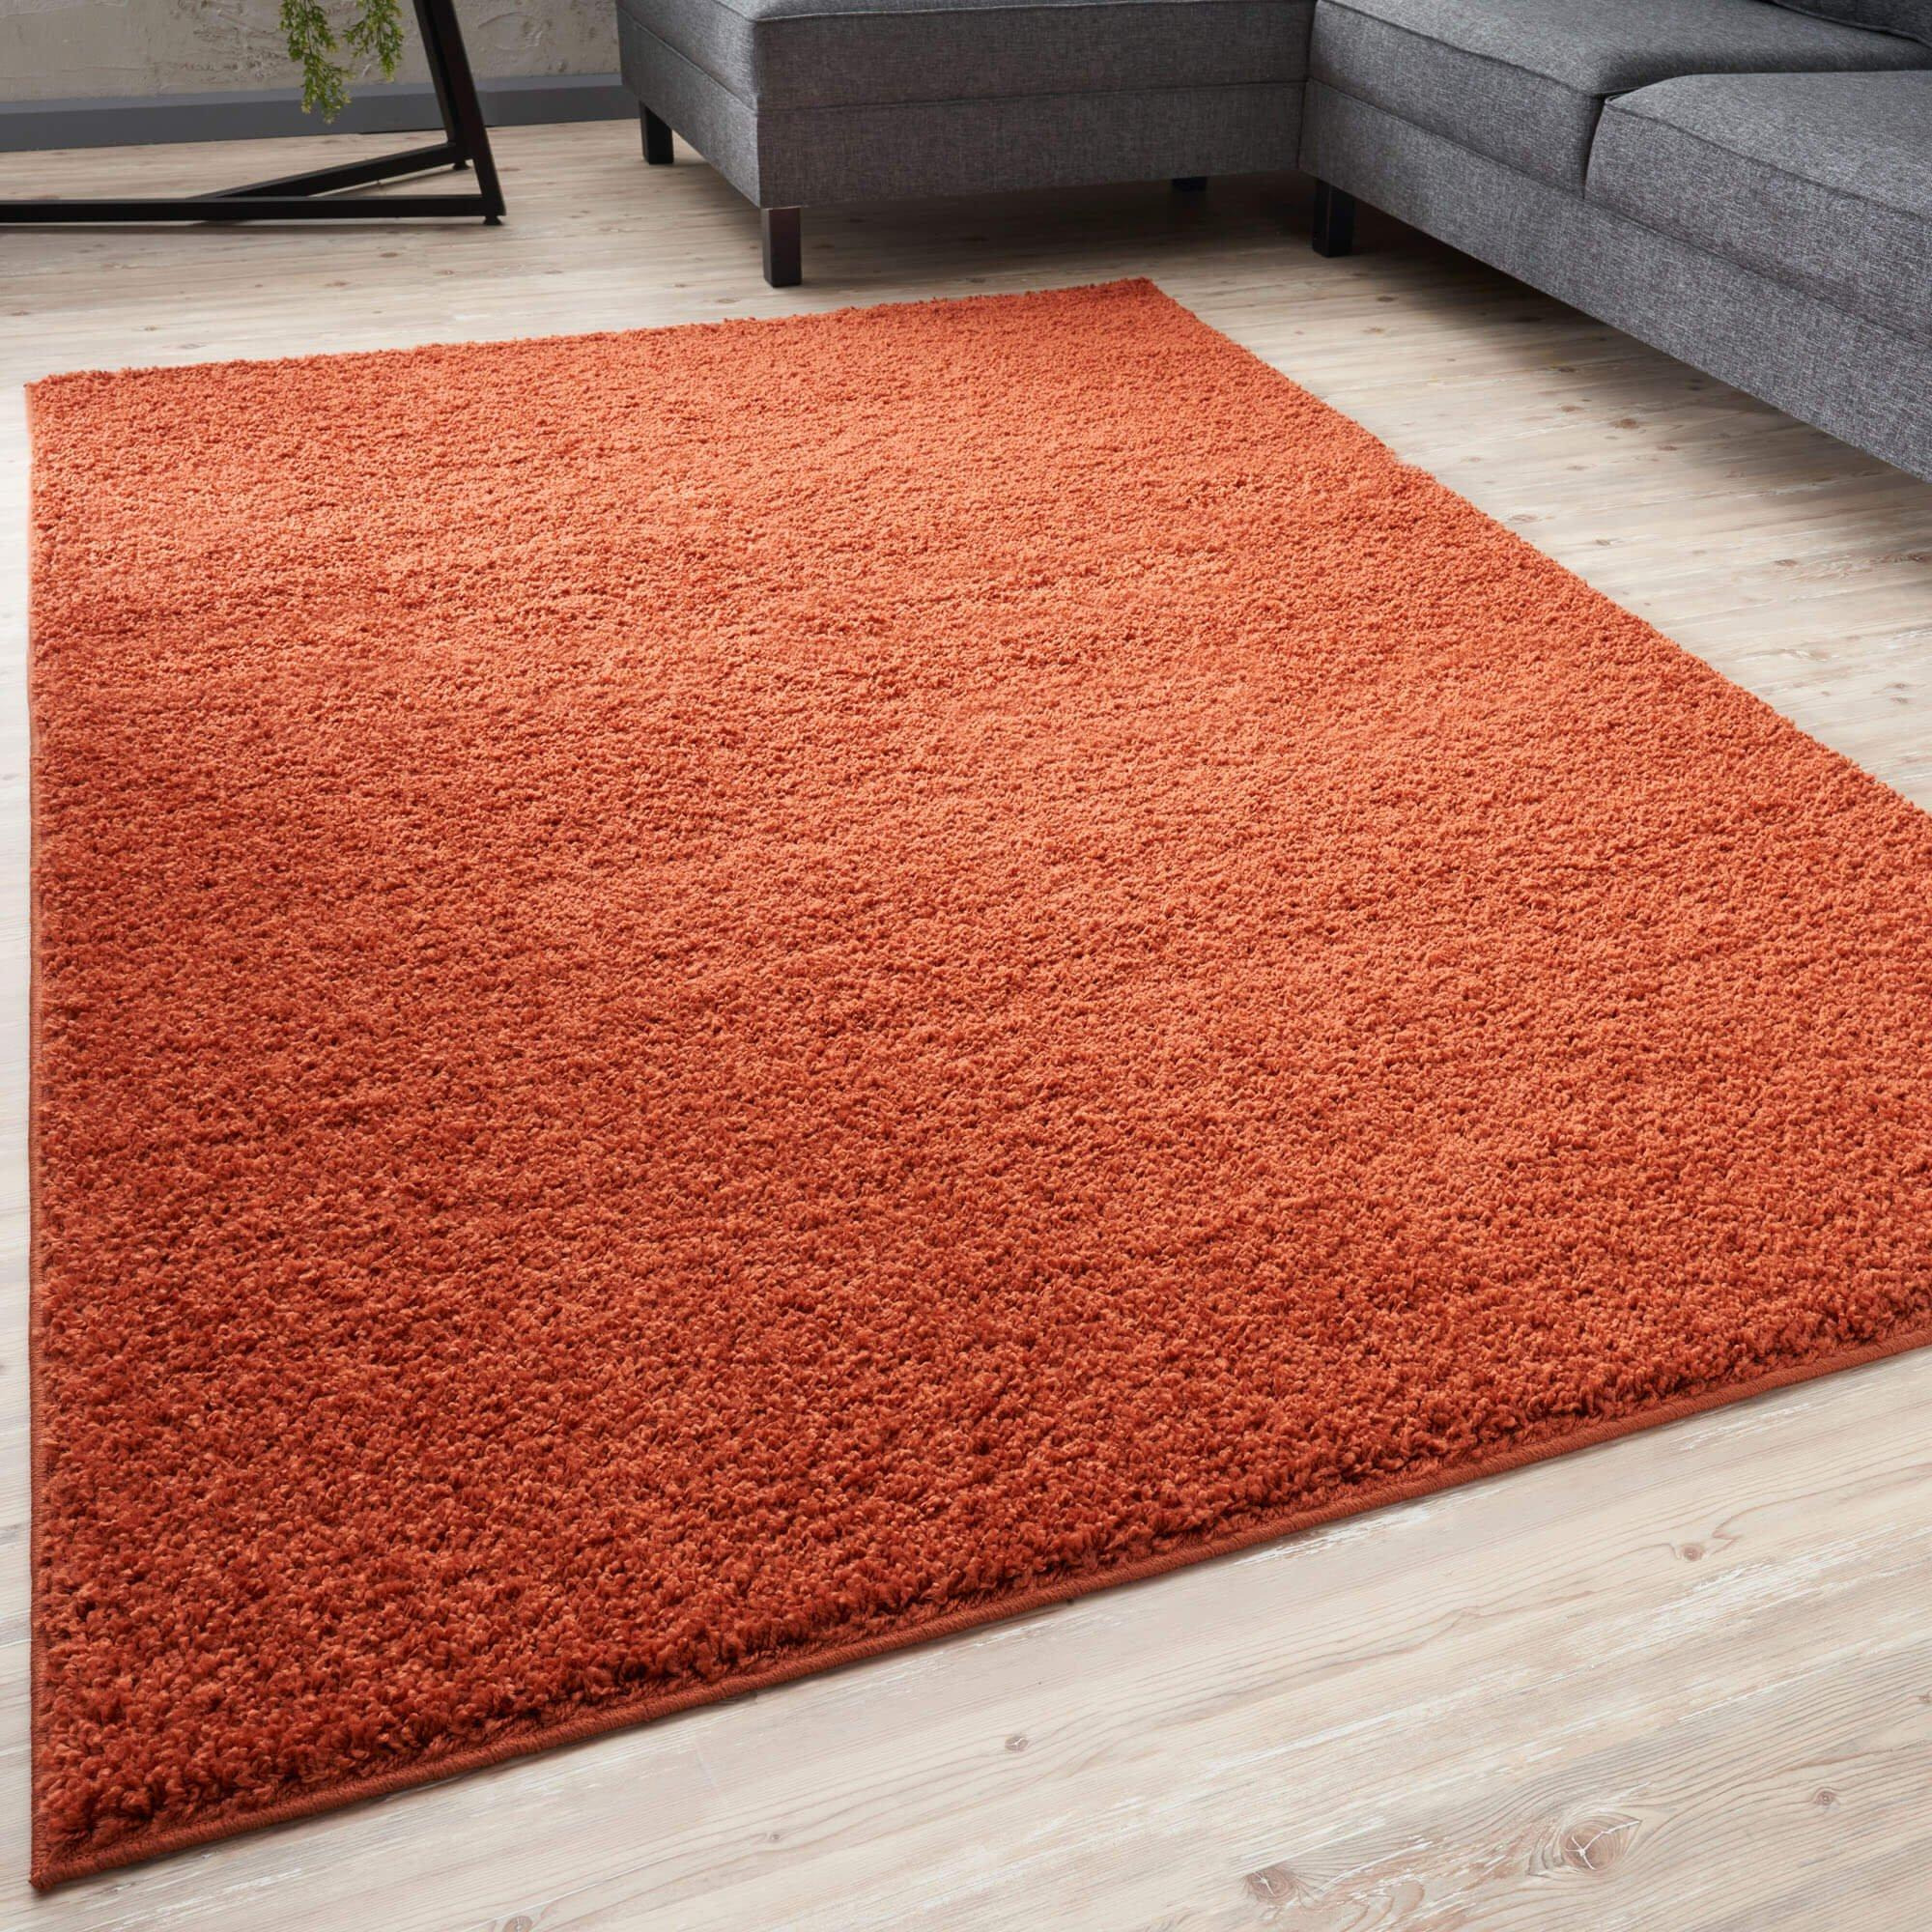 Myshaggy Collection Rugs Solid Design - Terra - image 1